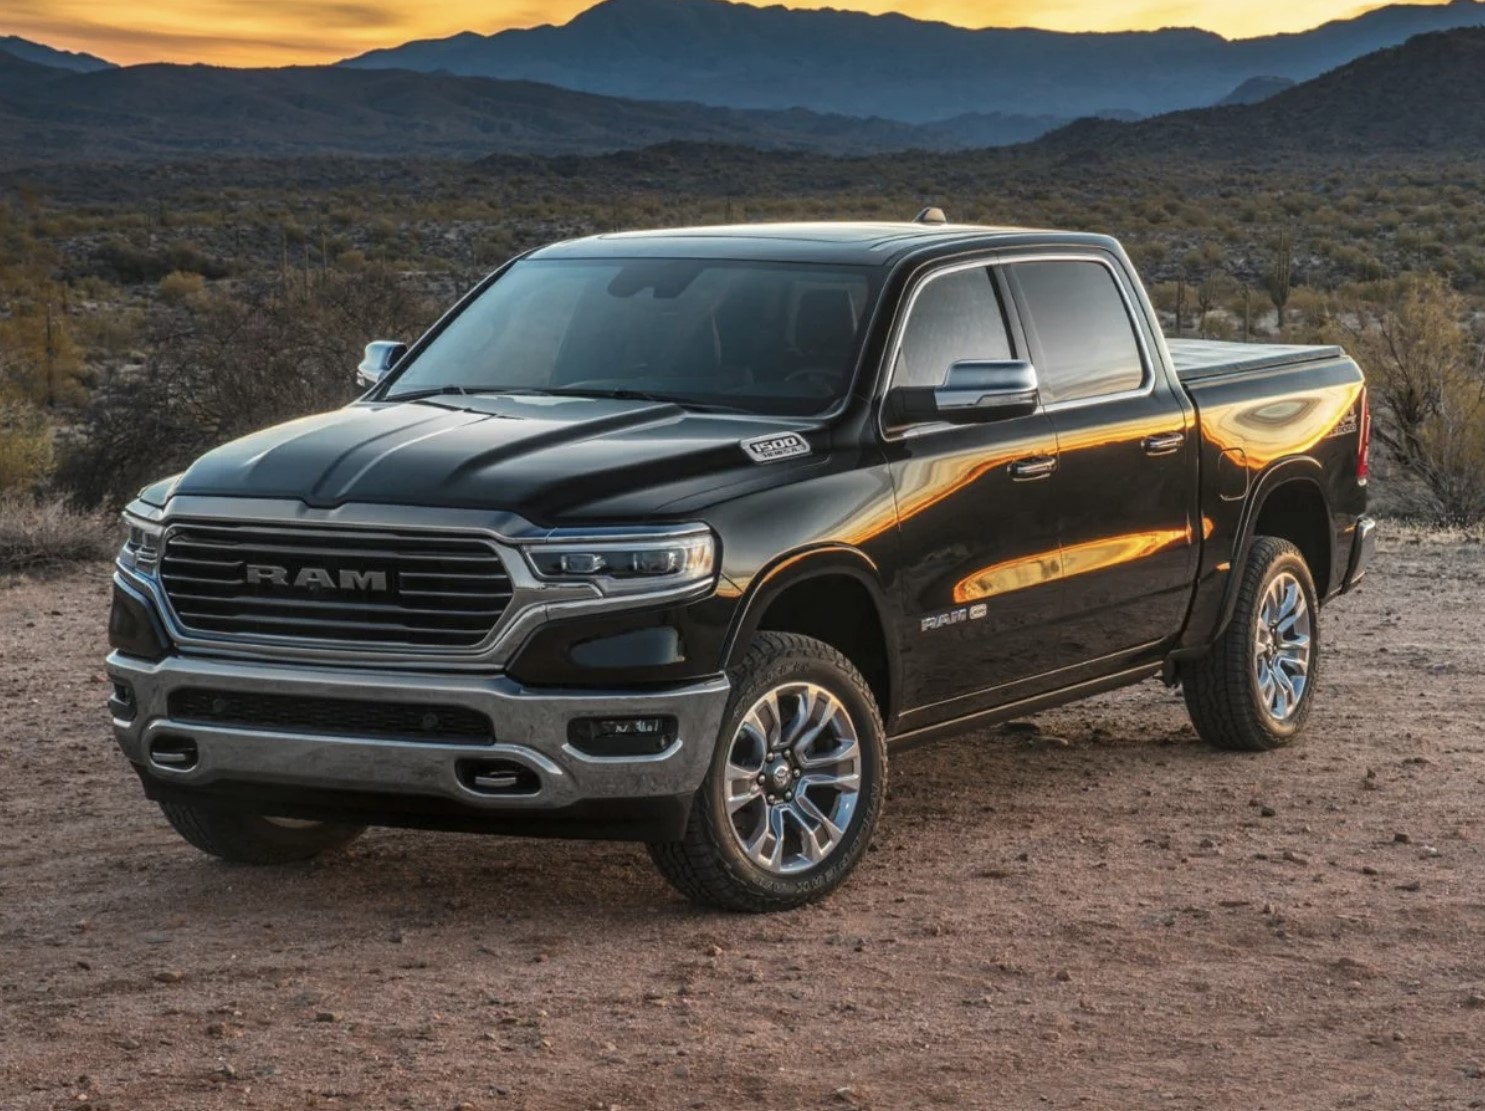 The 2023 Ram 1500 parked in the desert